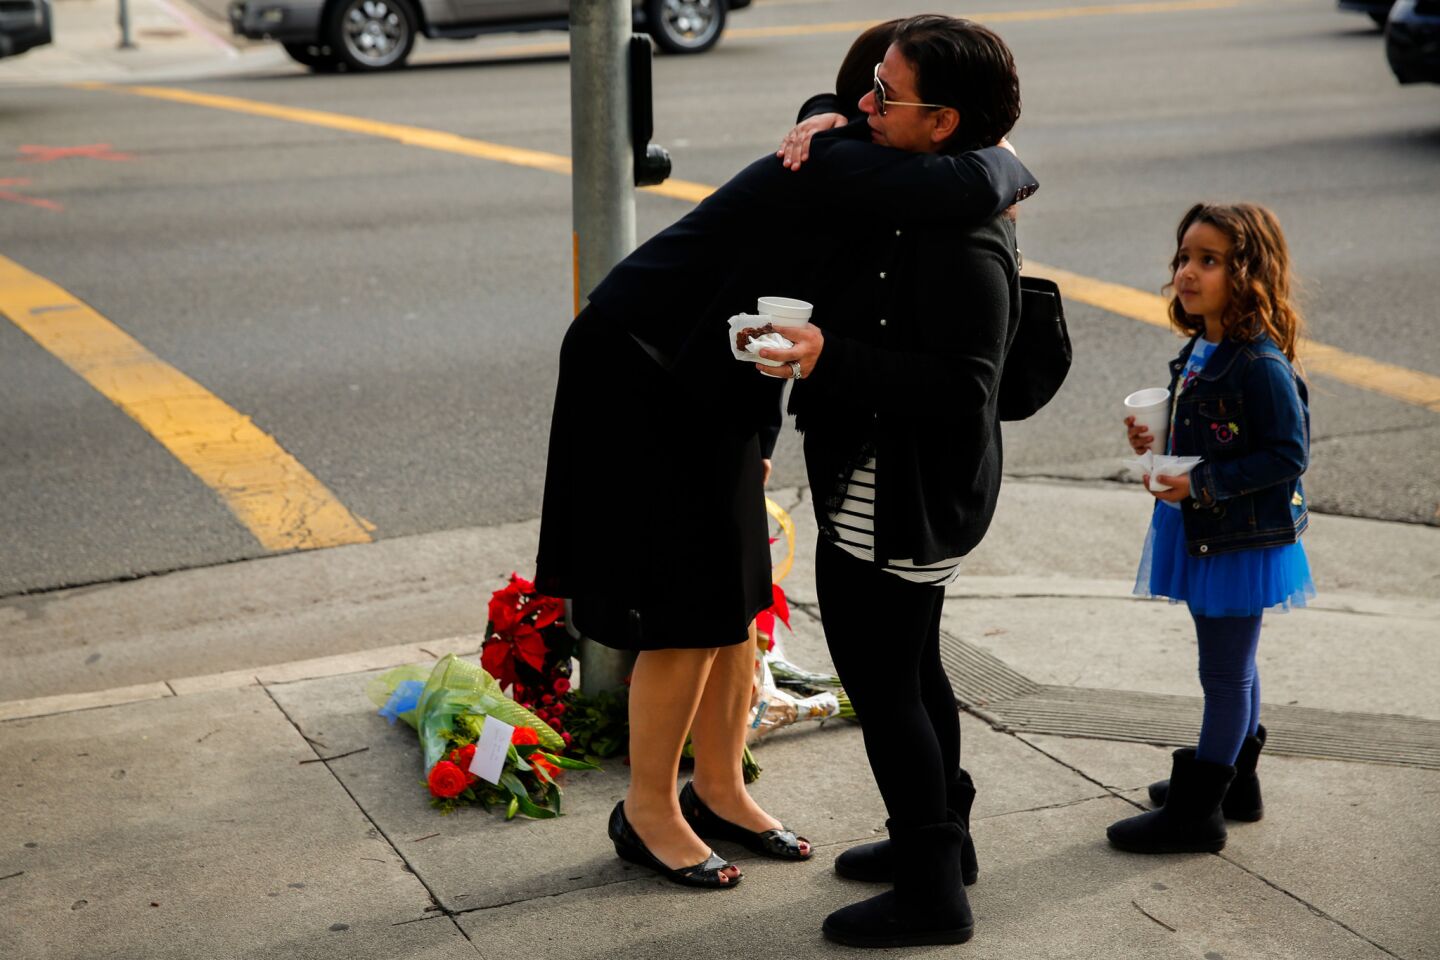 Emotions overflow at a memorial at the corner of Vincent Street and Pacific Coast Highway in Redondo Beach on Thursday morning. Three women died after being struck Wednesday night in a crosswalk in front of St. James Catholic Church.